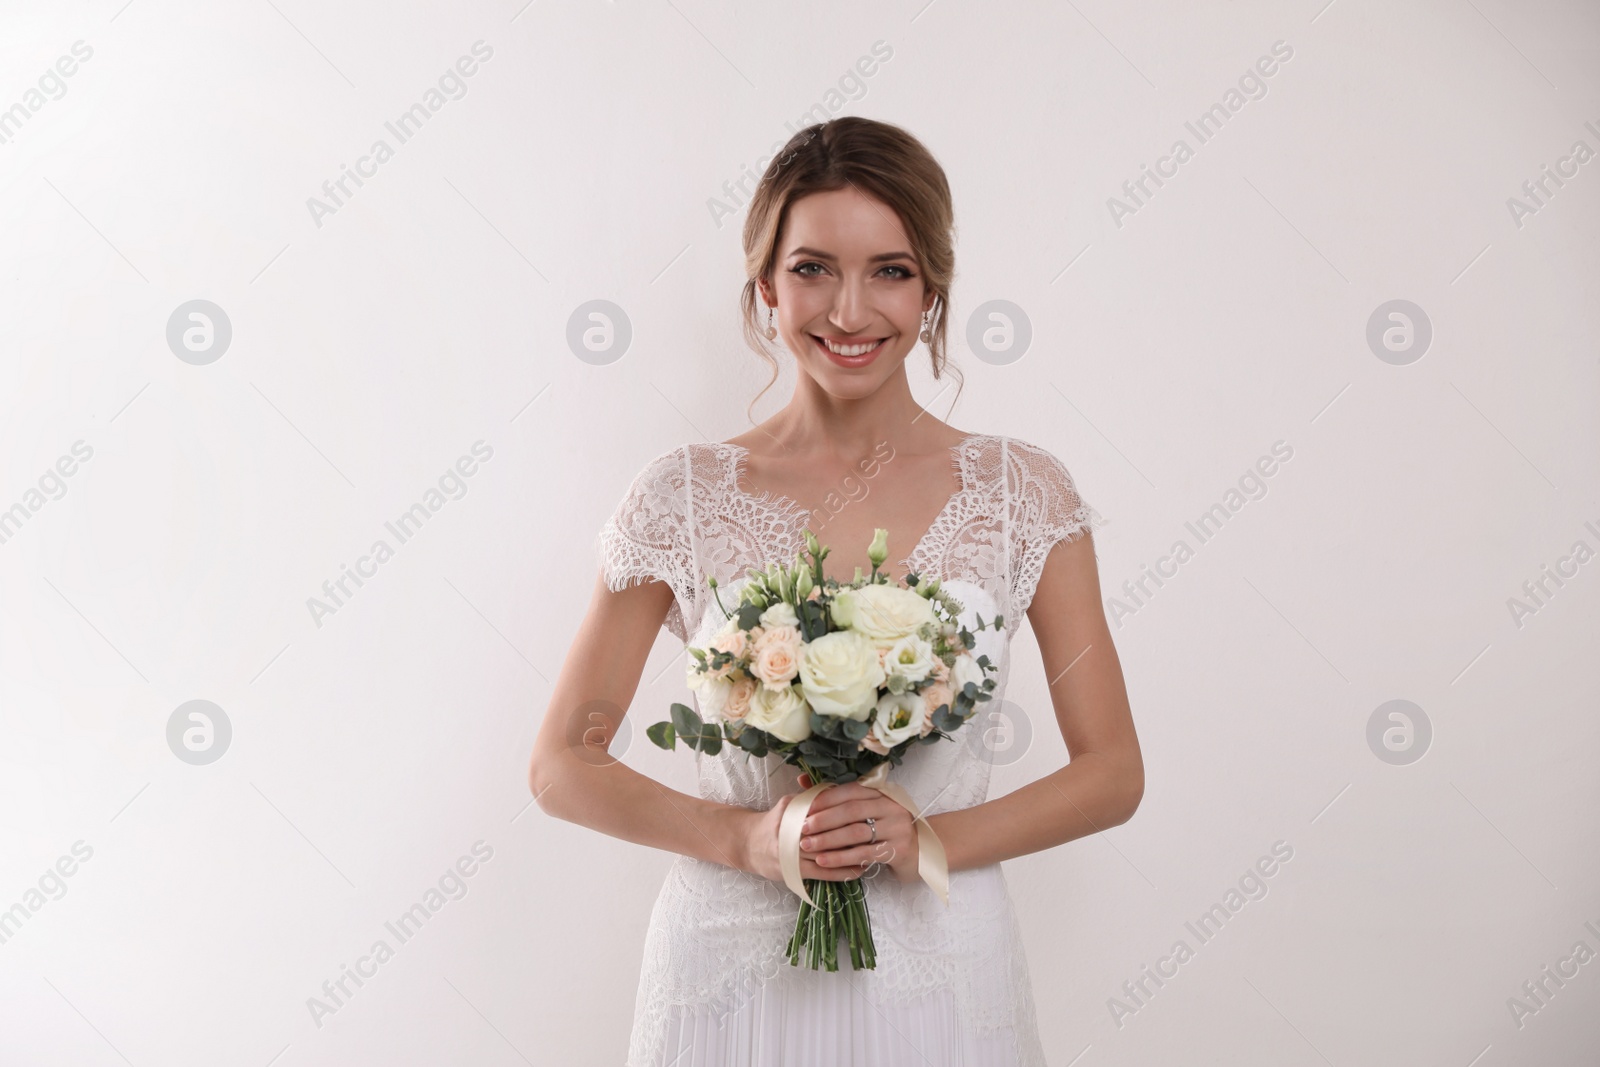 Photo of Young bride with elegant hairstyle holding wedding bouquet on white background